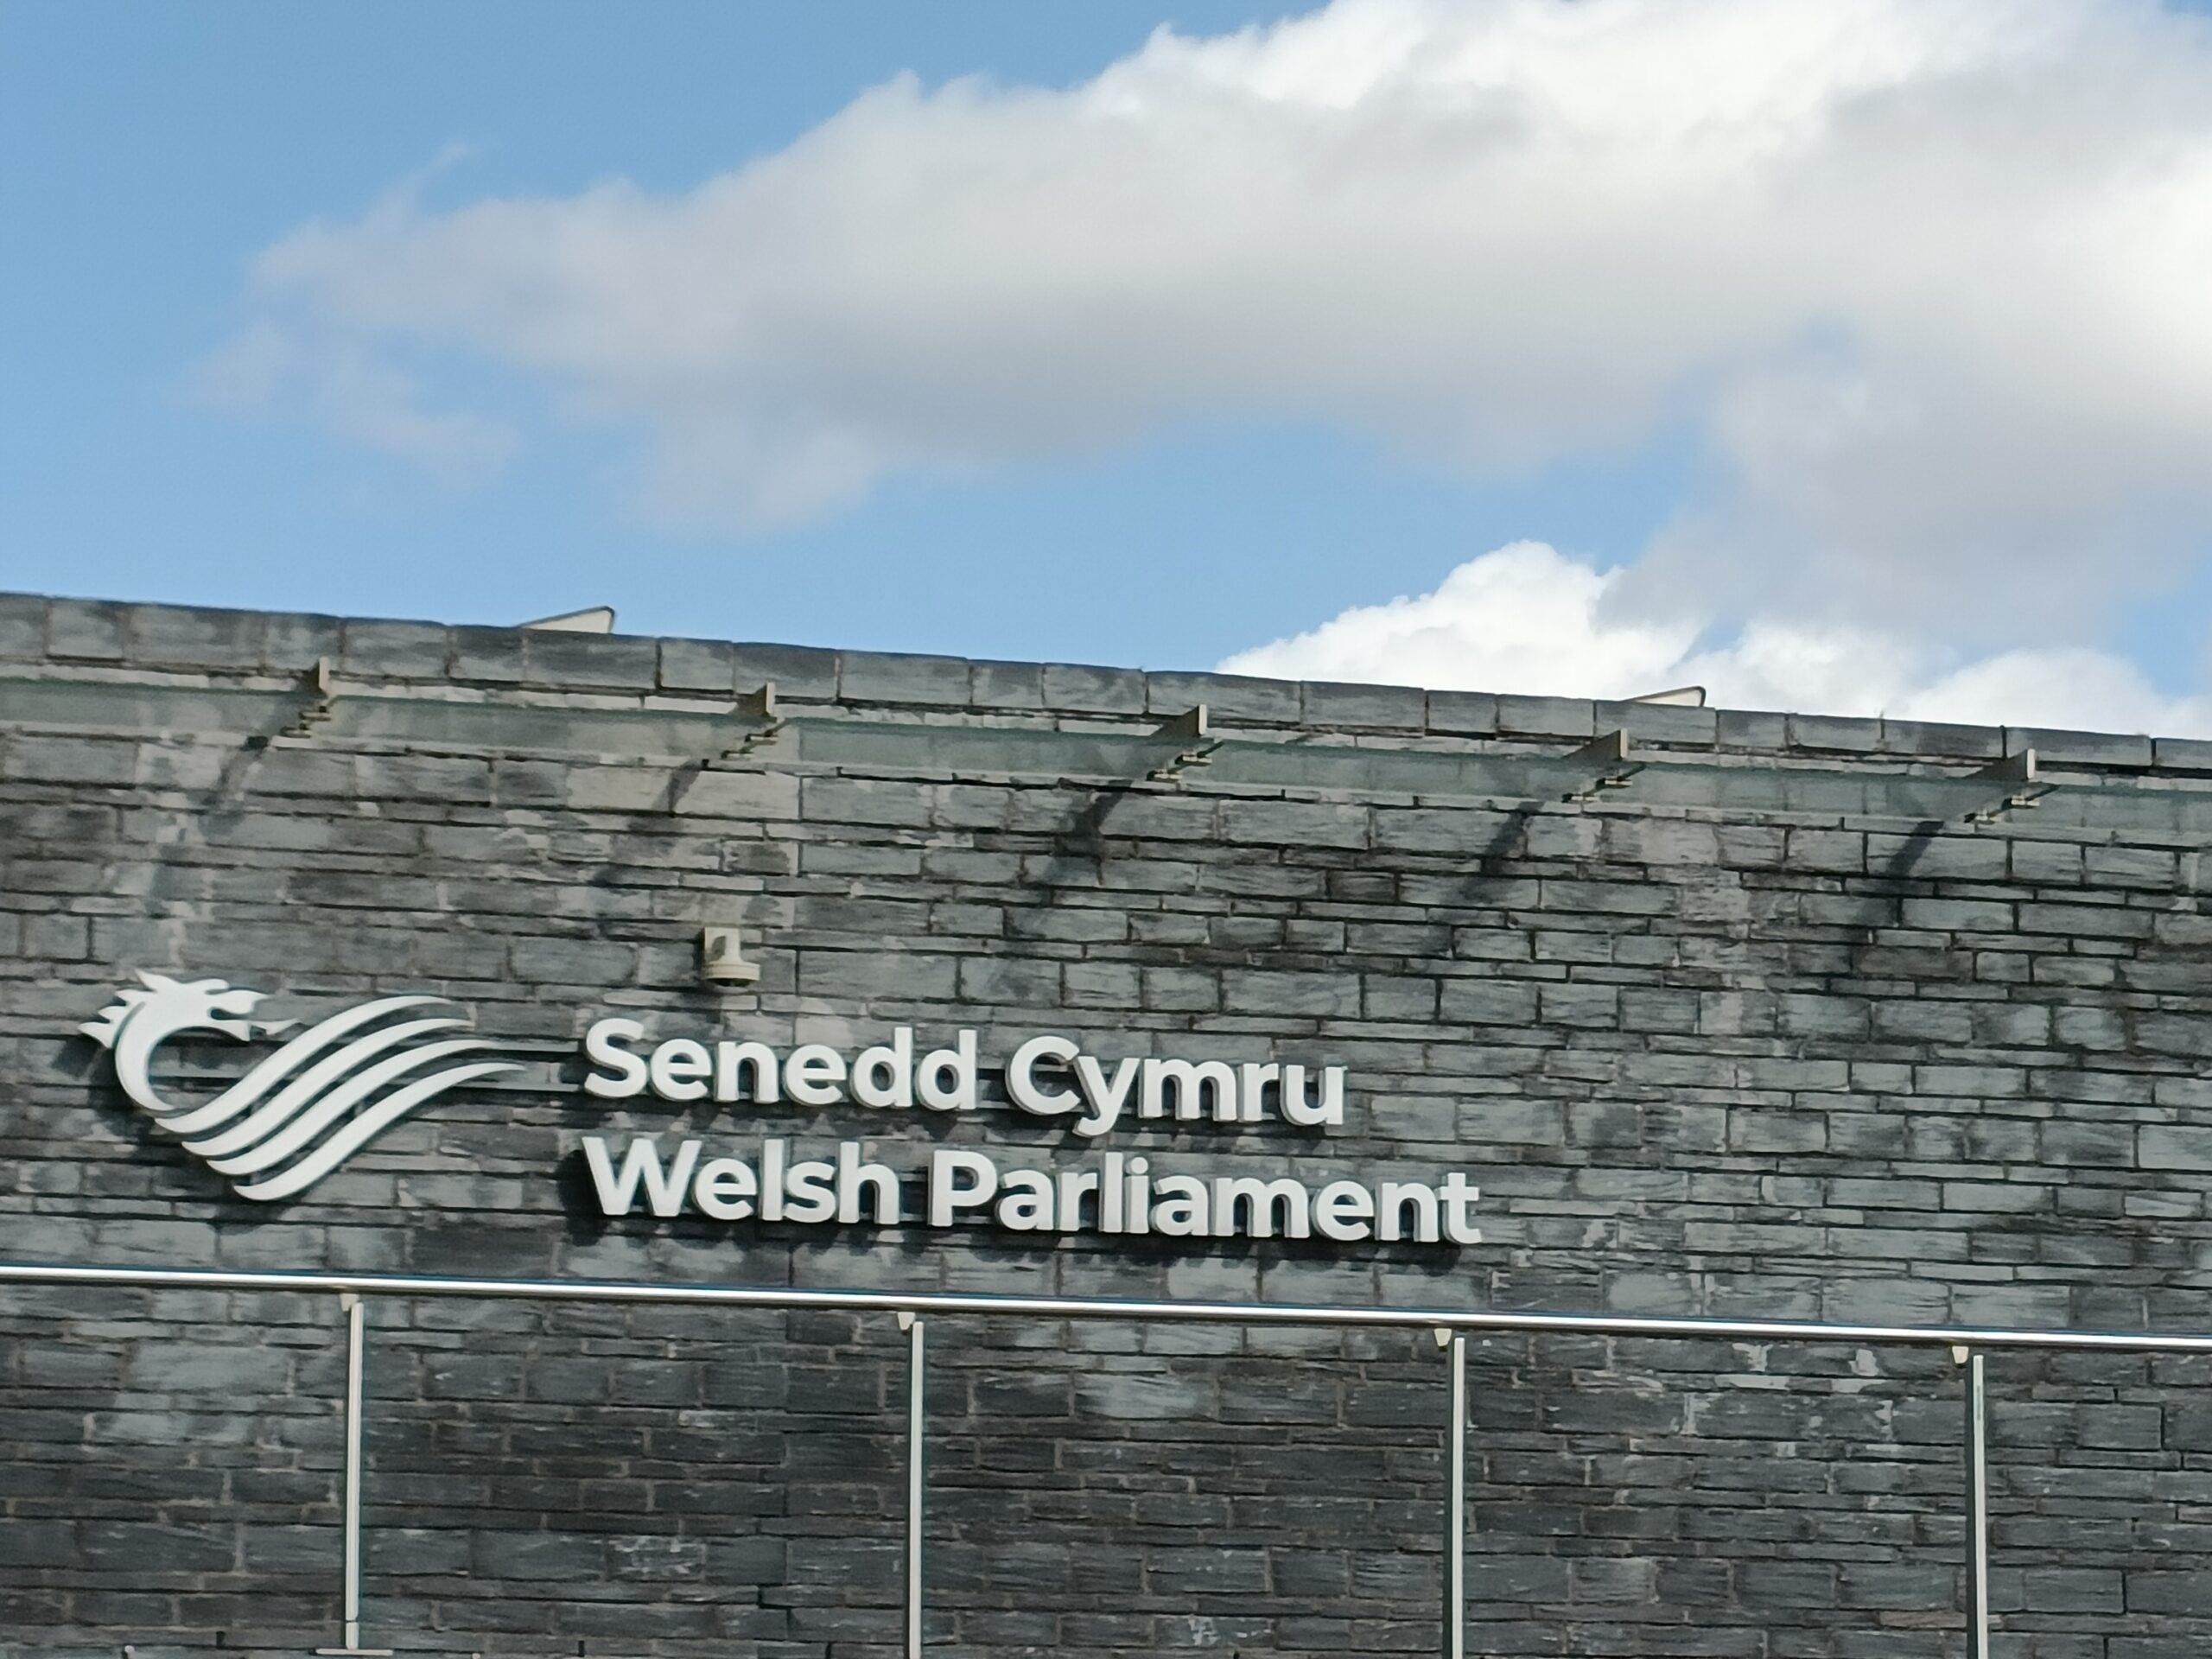 Petition by campaigners following tragic death debated in the Senedd